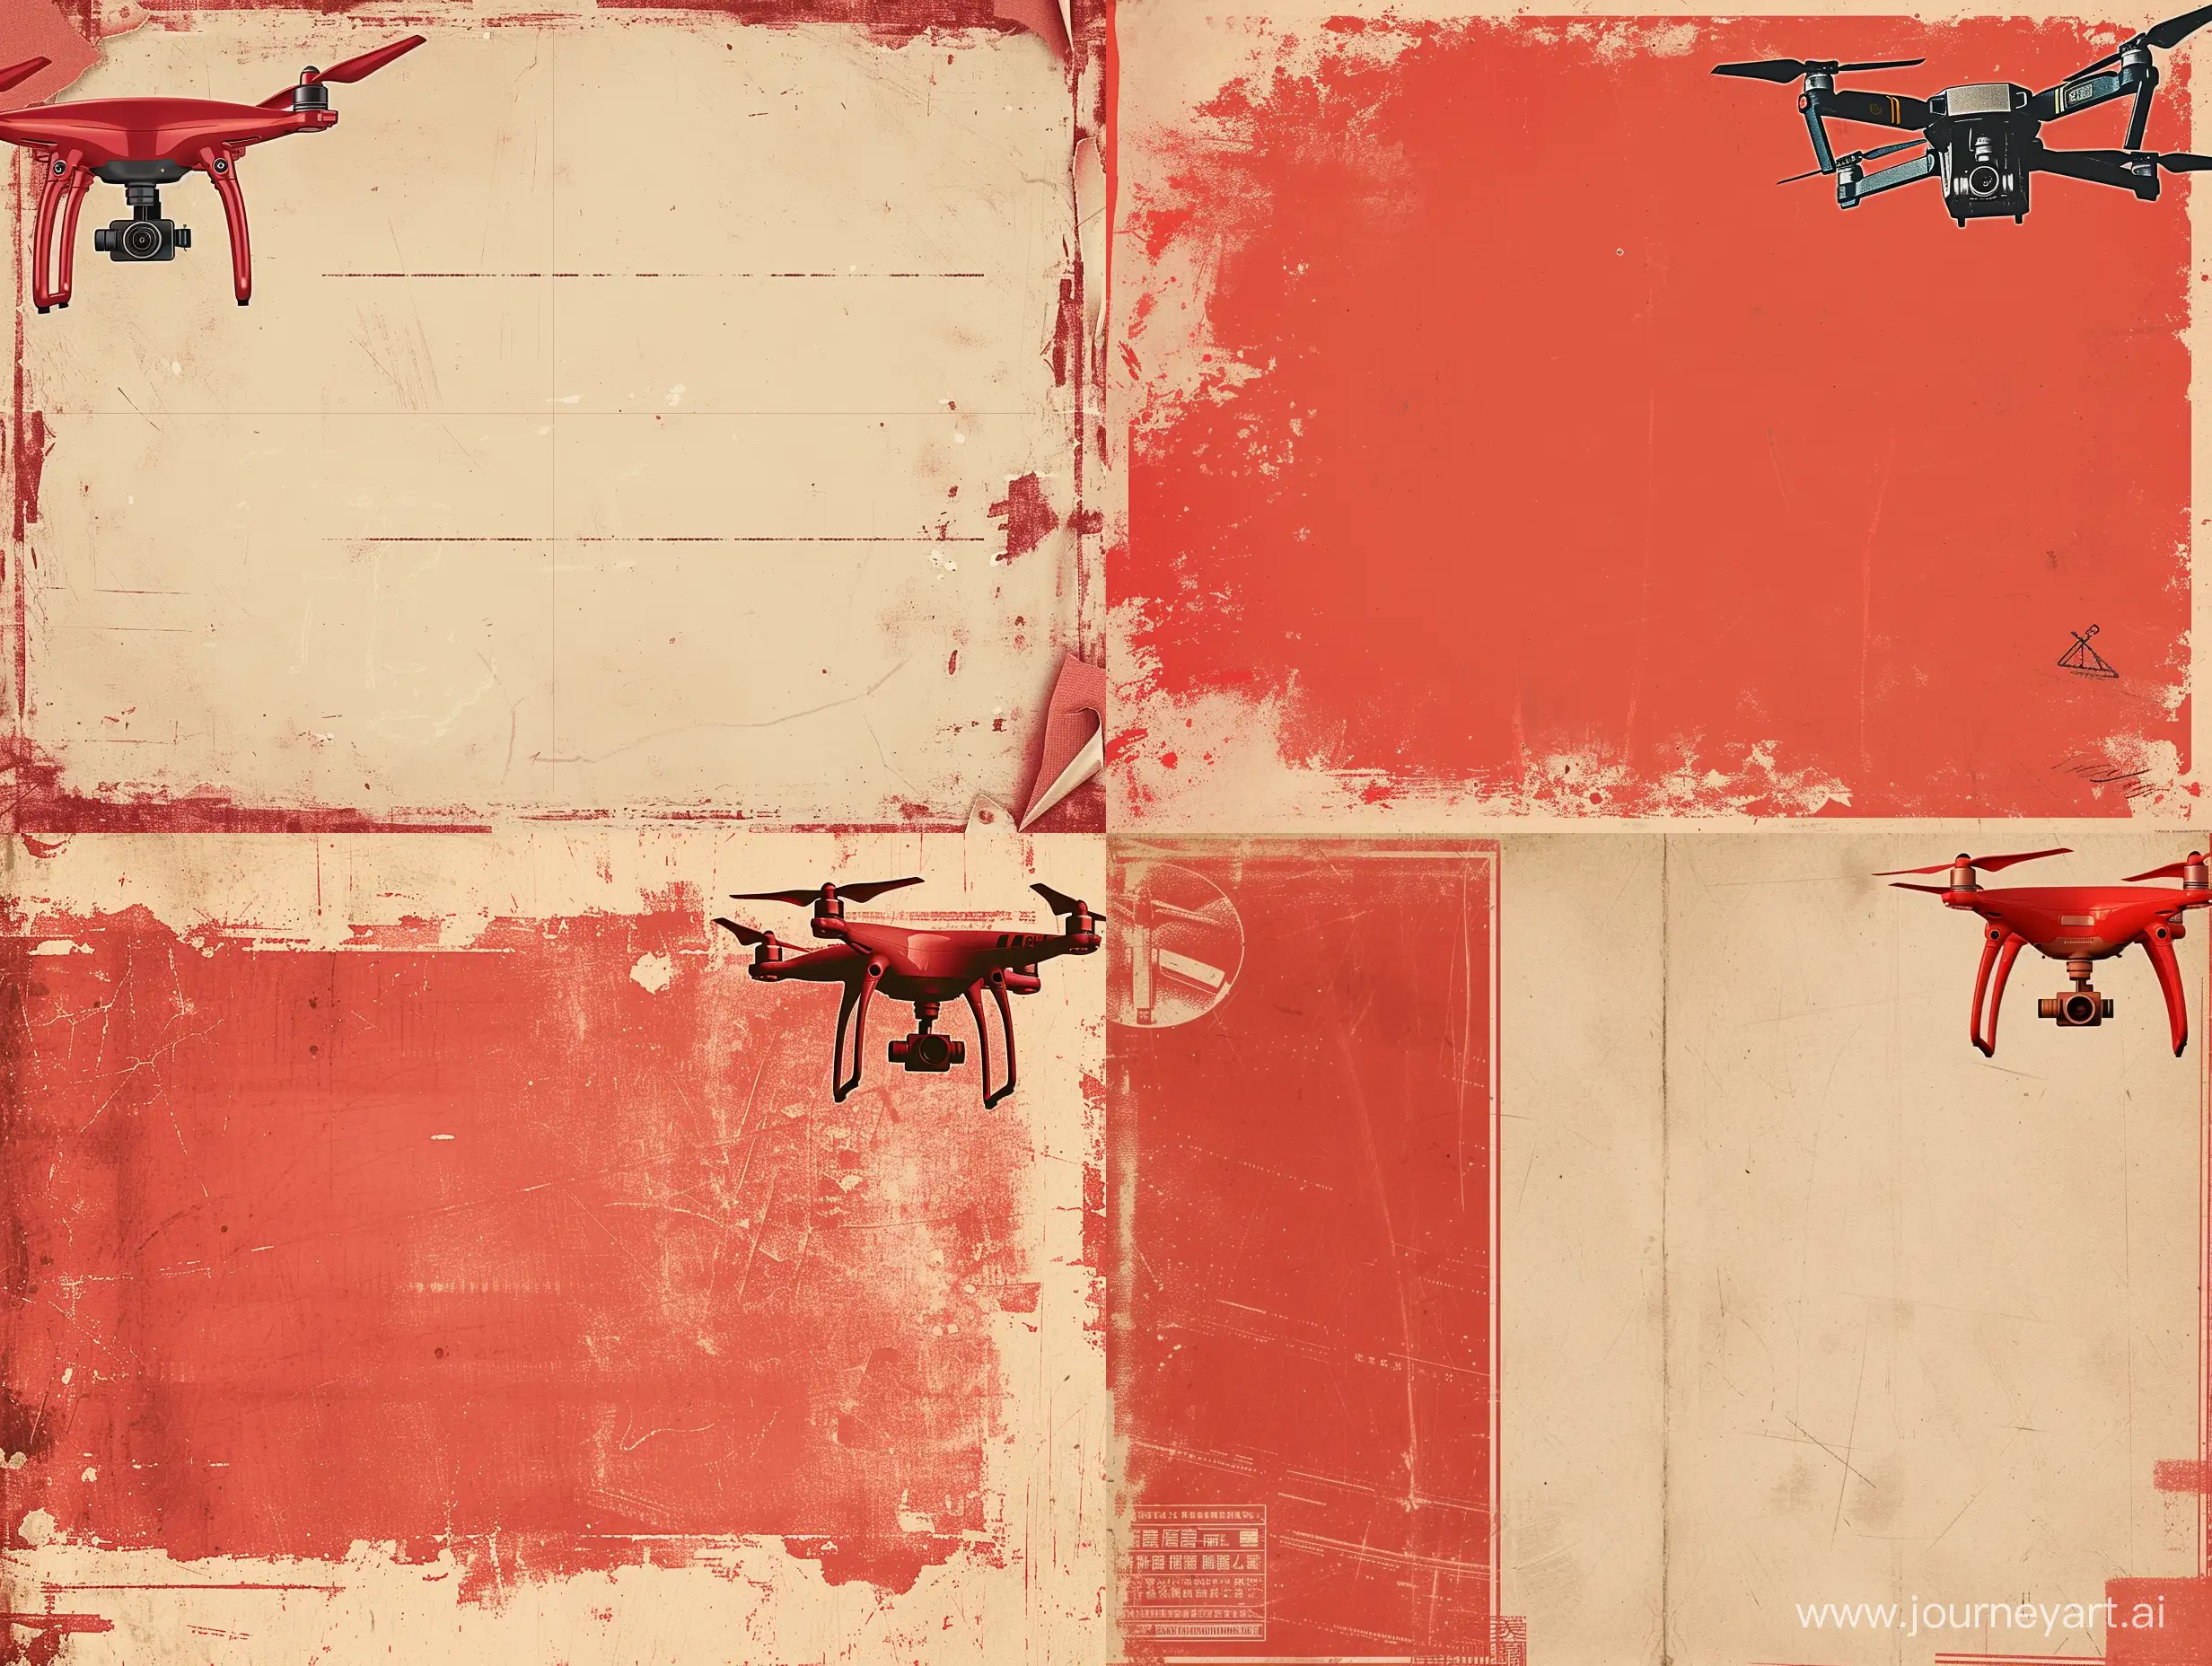 An old communist poster in red colors with a quadcopter in the corner and an empty text space in the center